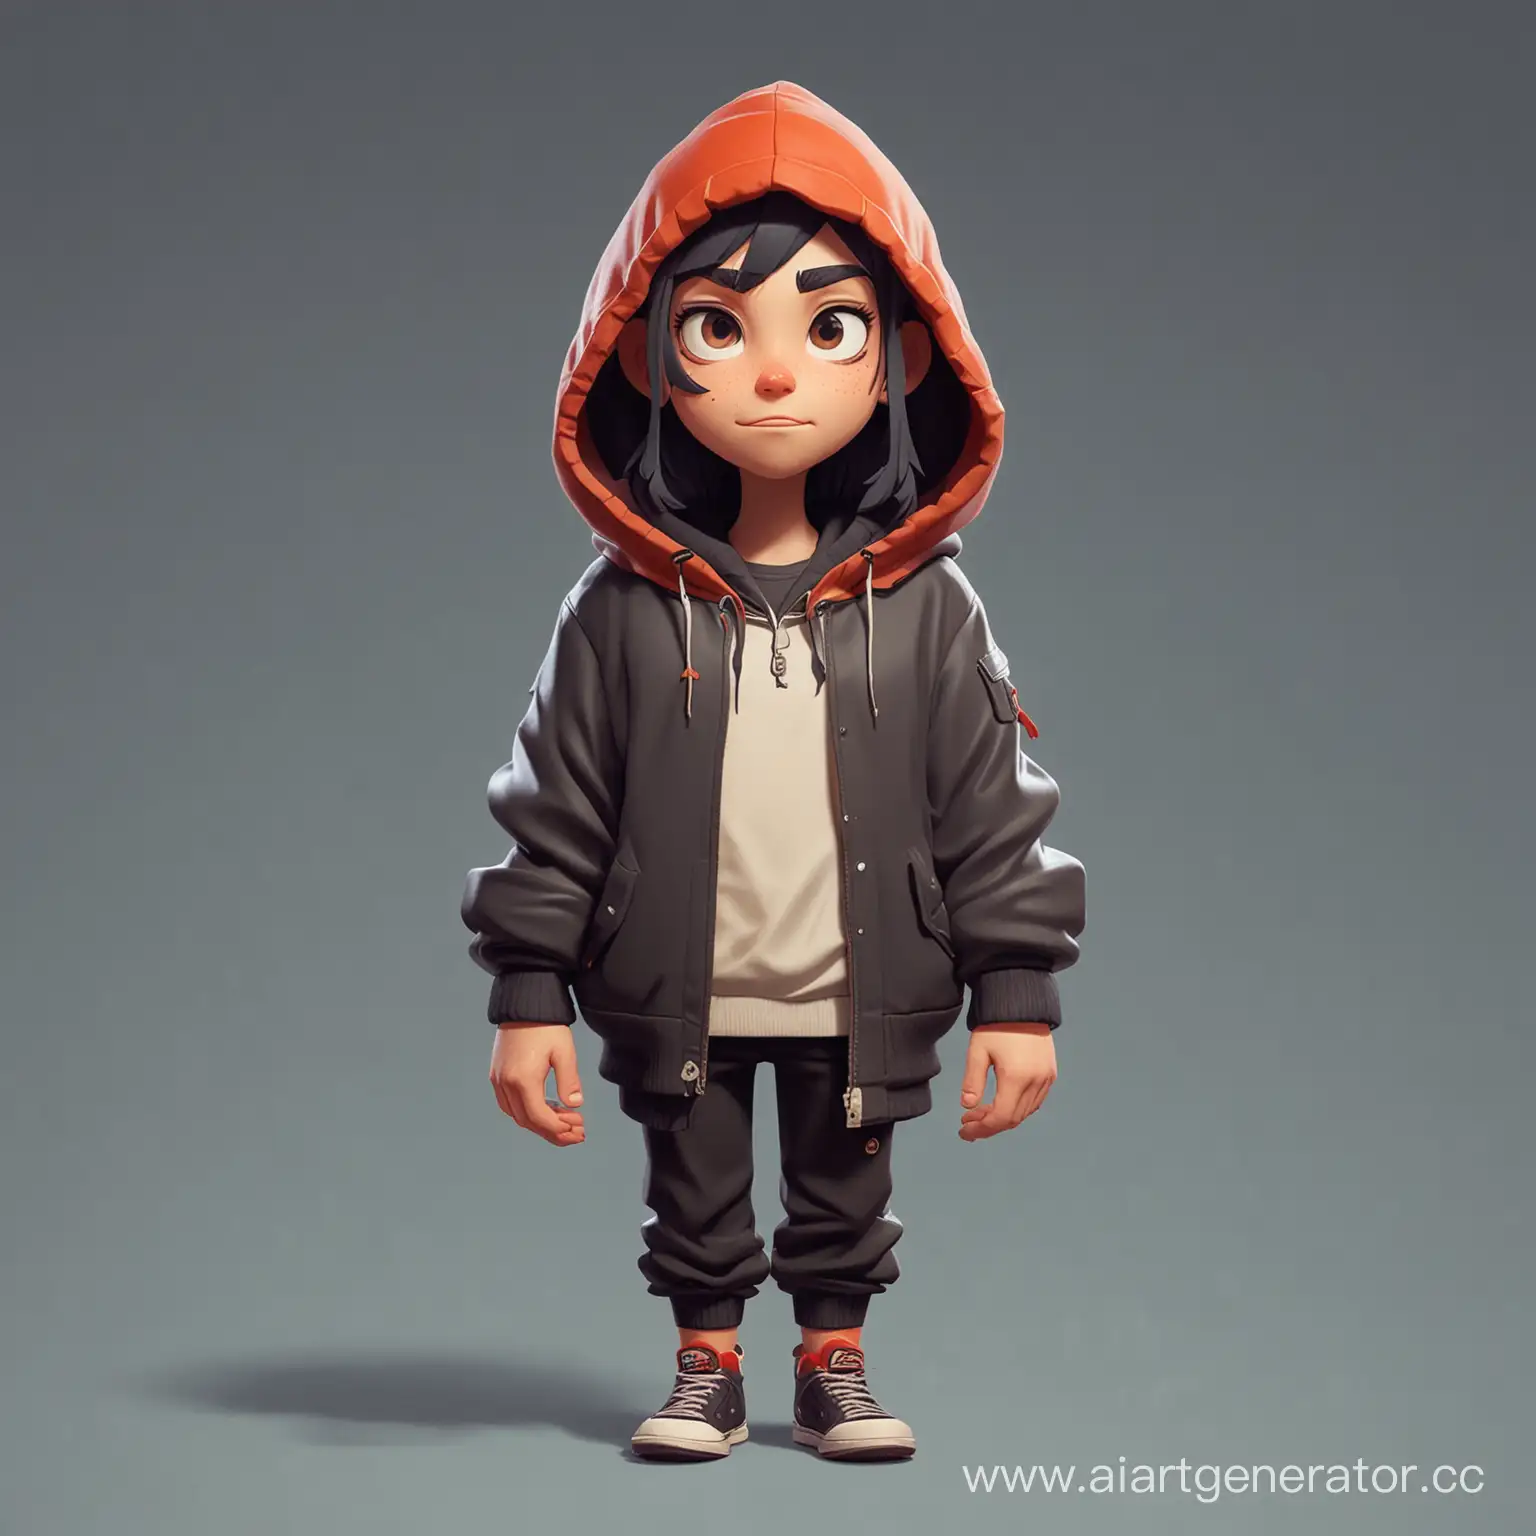 Urban-Youth-Culture-2D-Character-Embracing-Street-Style